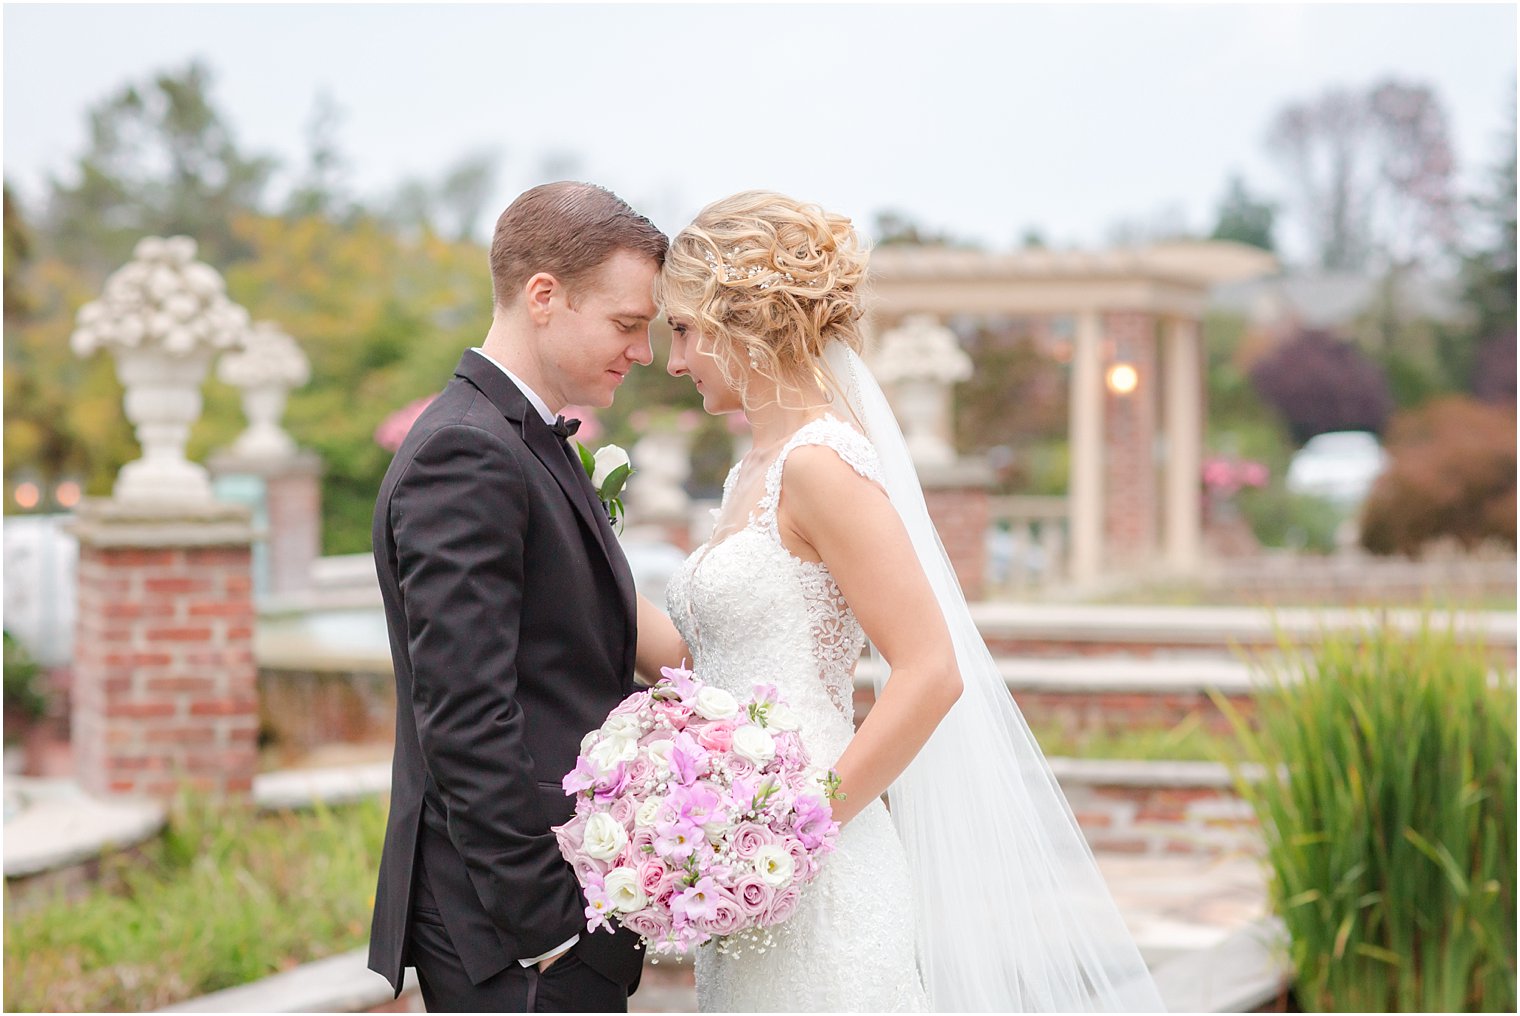 Romantic bride and groom photo at The Manor